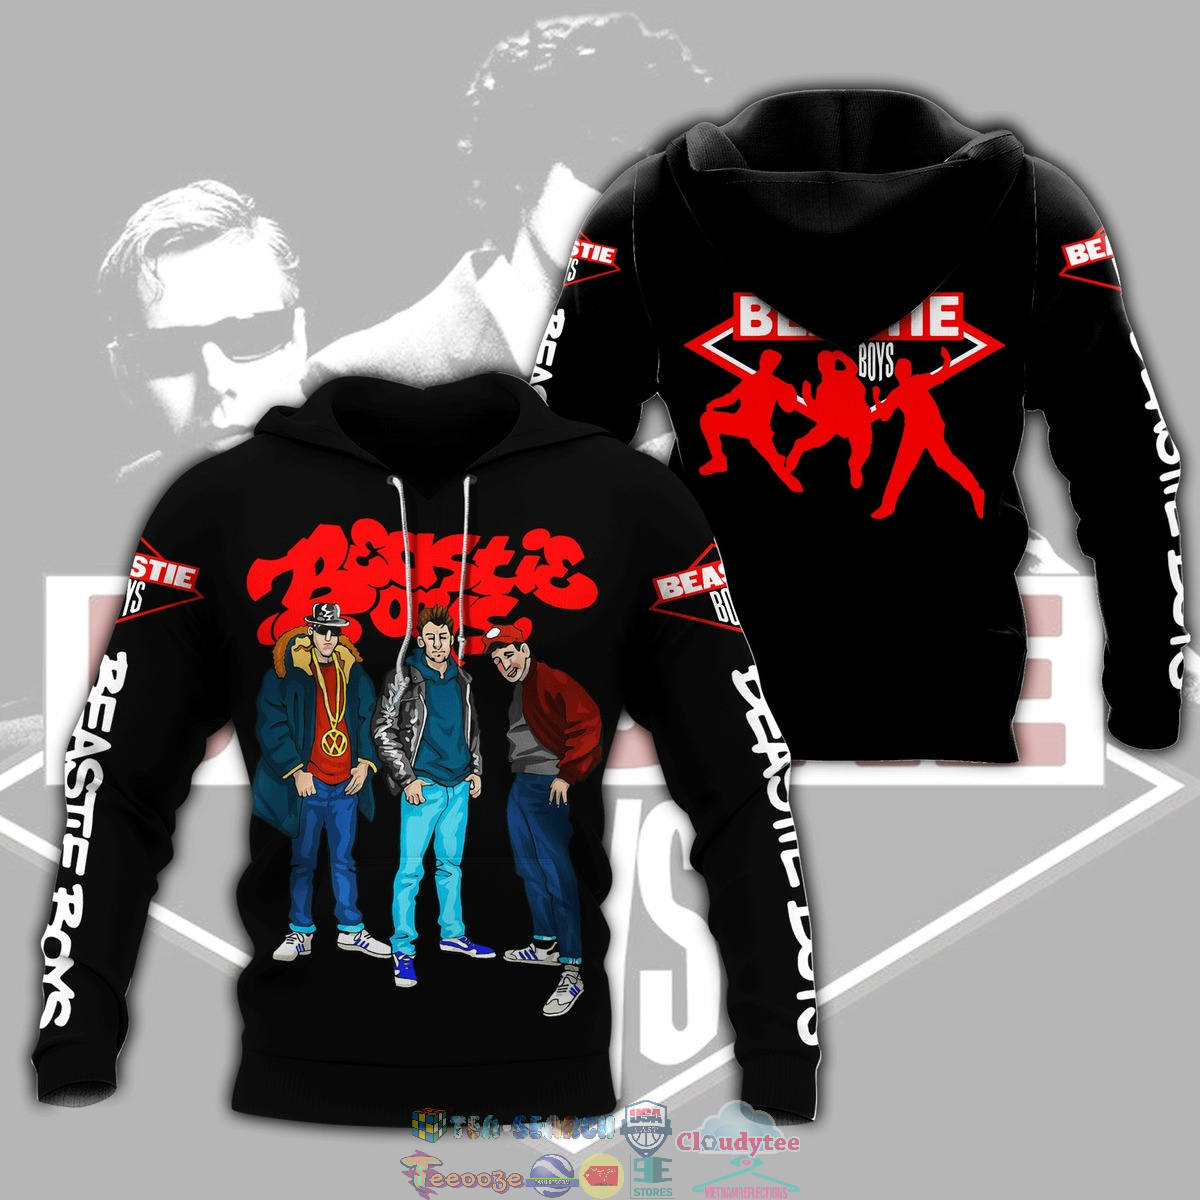 Beastie Boys Band ver 2 3D hoodie and t-shirt